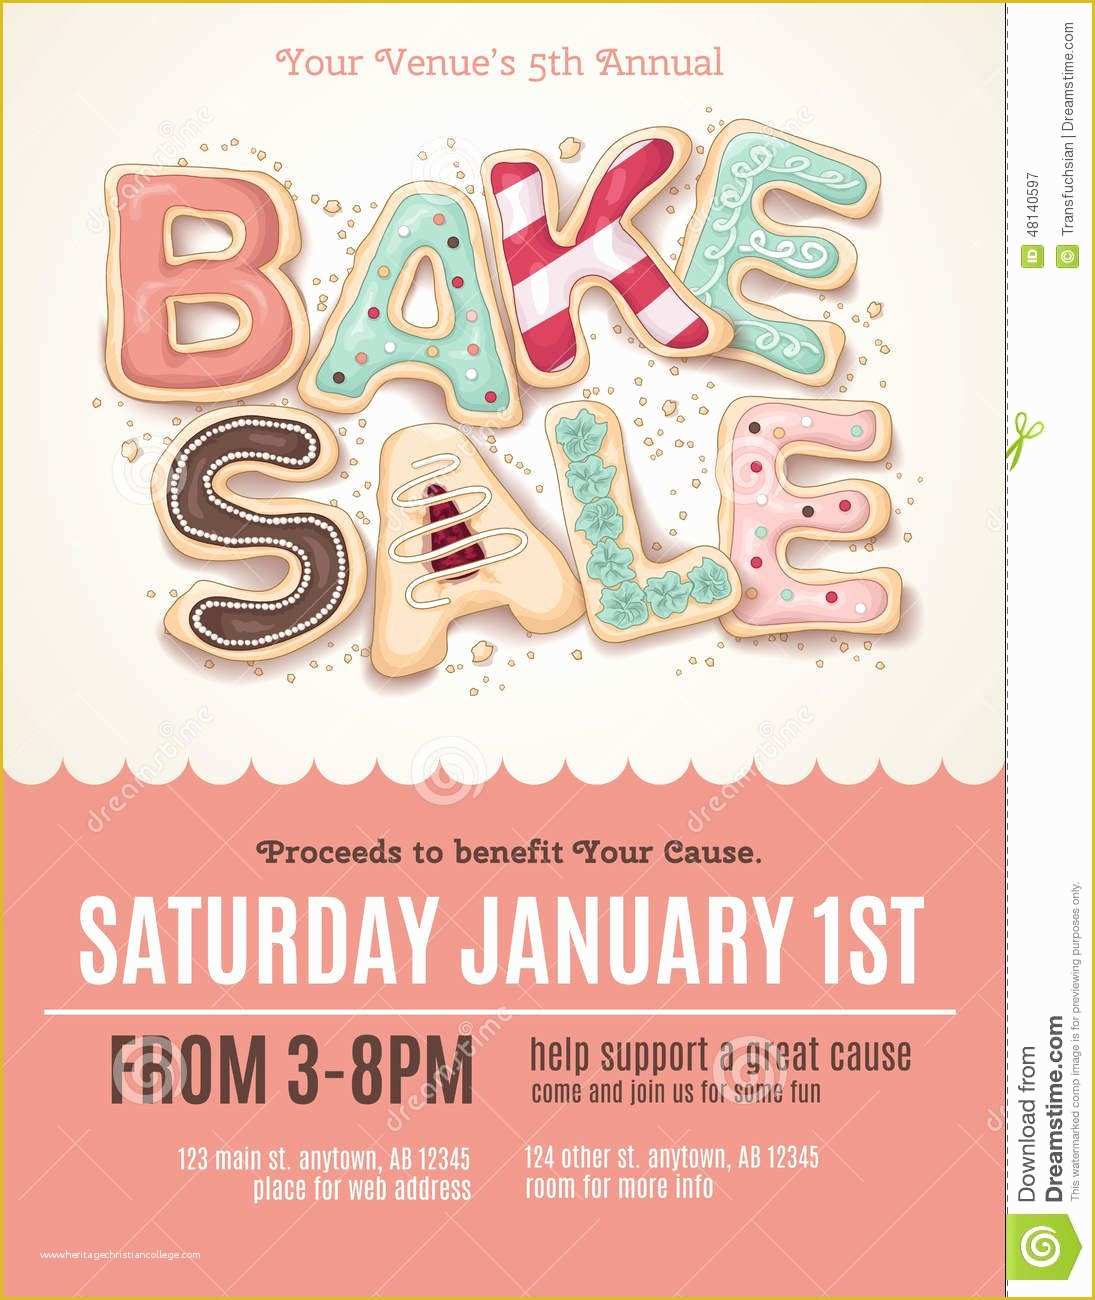 Bake Sale Flyer Template Free Of Fun Cookie Bake Sale Flyer Template Download From Over